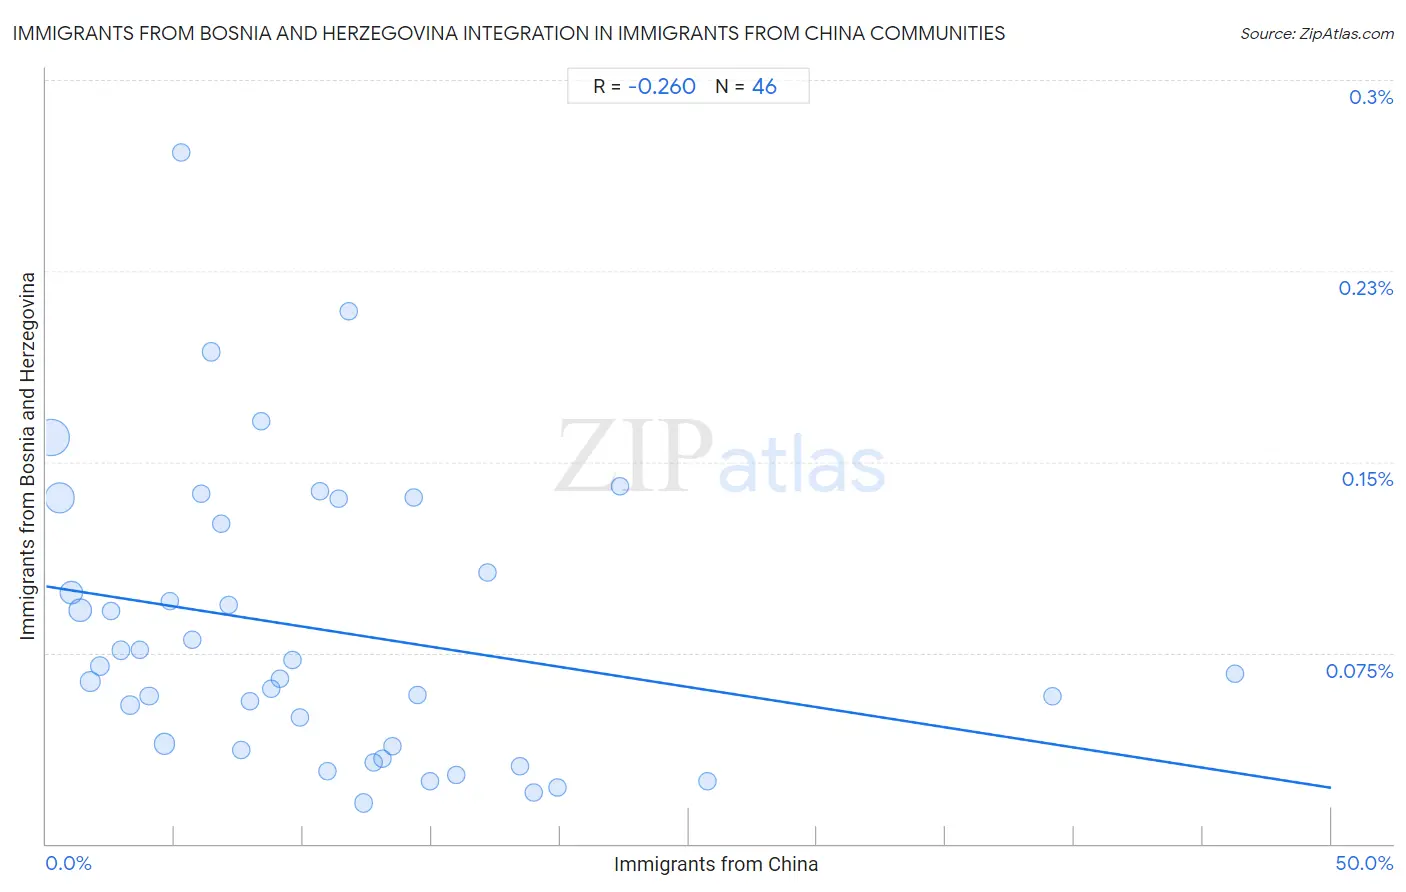 Immigrants from China Integration in Immigrants from Bosnia and Herzegovina Communities